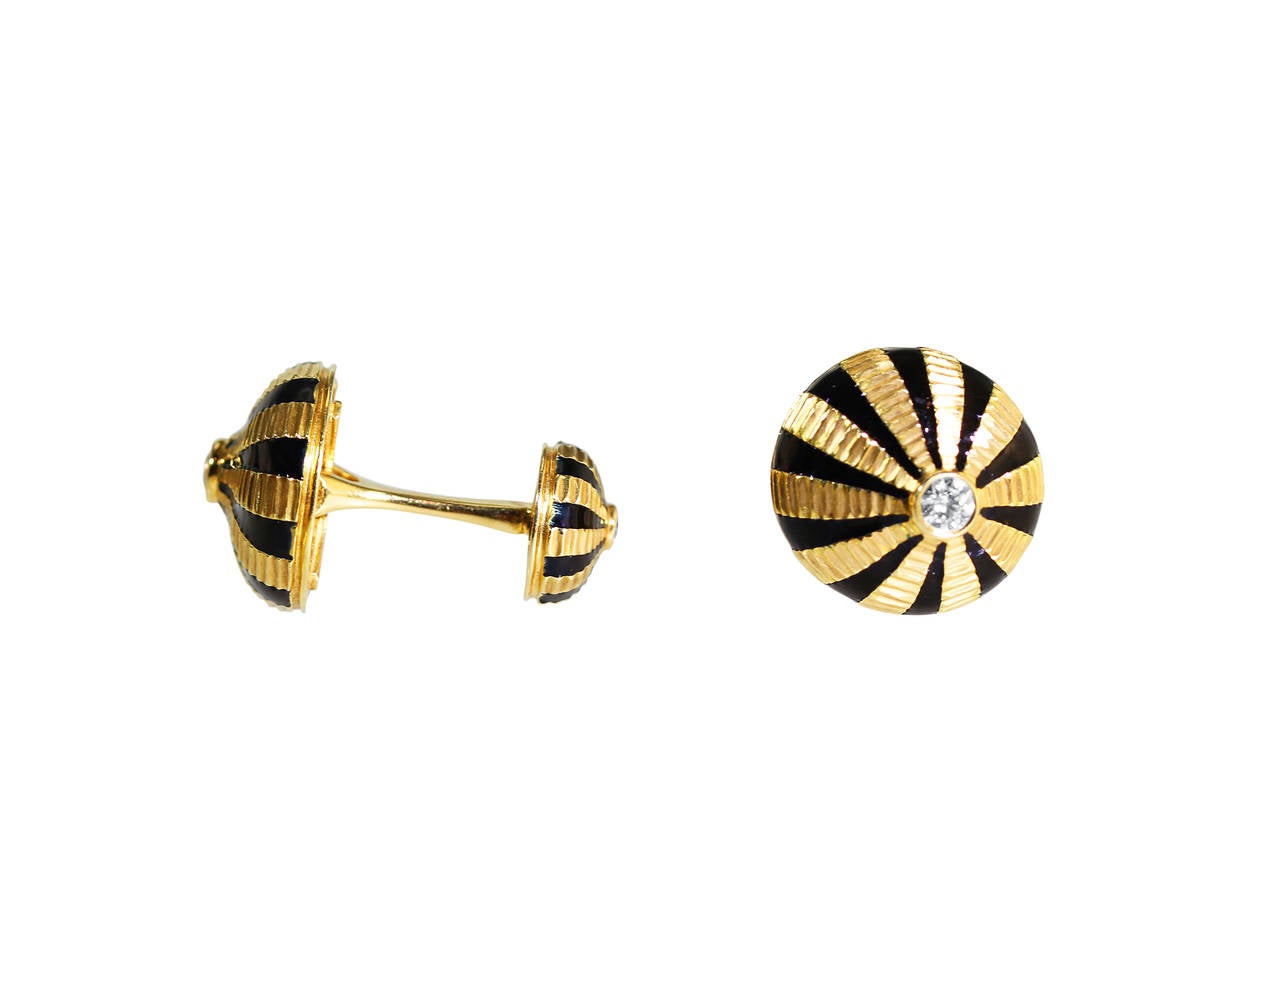 A pair of 18 karat yellow gold, diamond and black enamel cufflinks by Schlumberger for Tiffany & Co., the terminals of bombe form set in the centers with 4 round diamonds weighing approximately 0.55 carat, framed by radiating bands of black enamel,